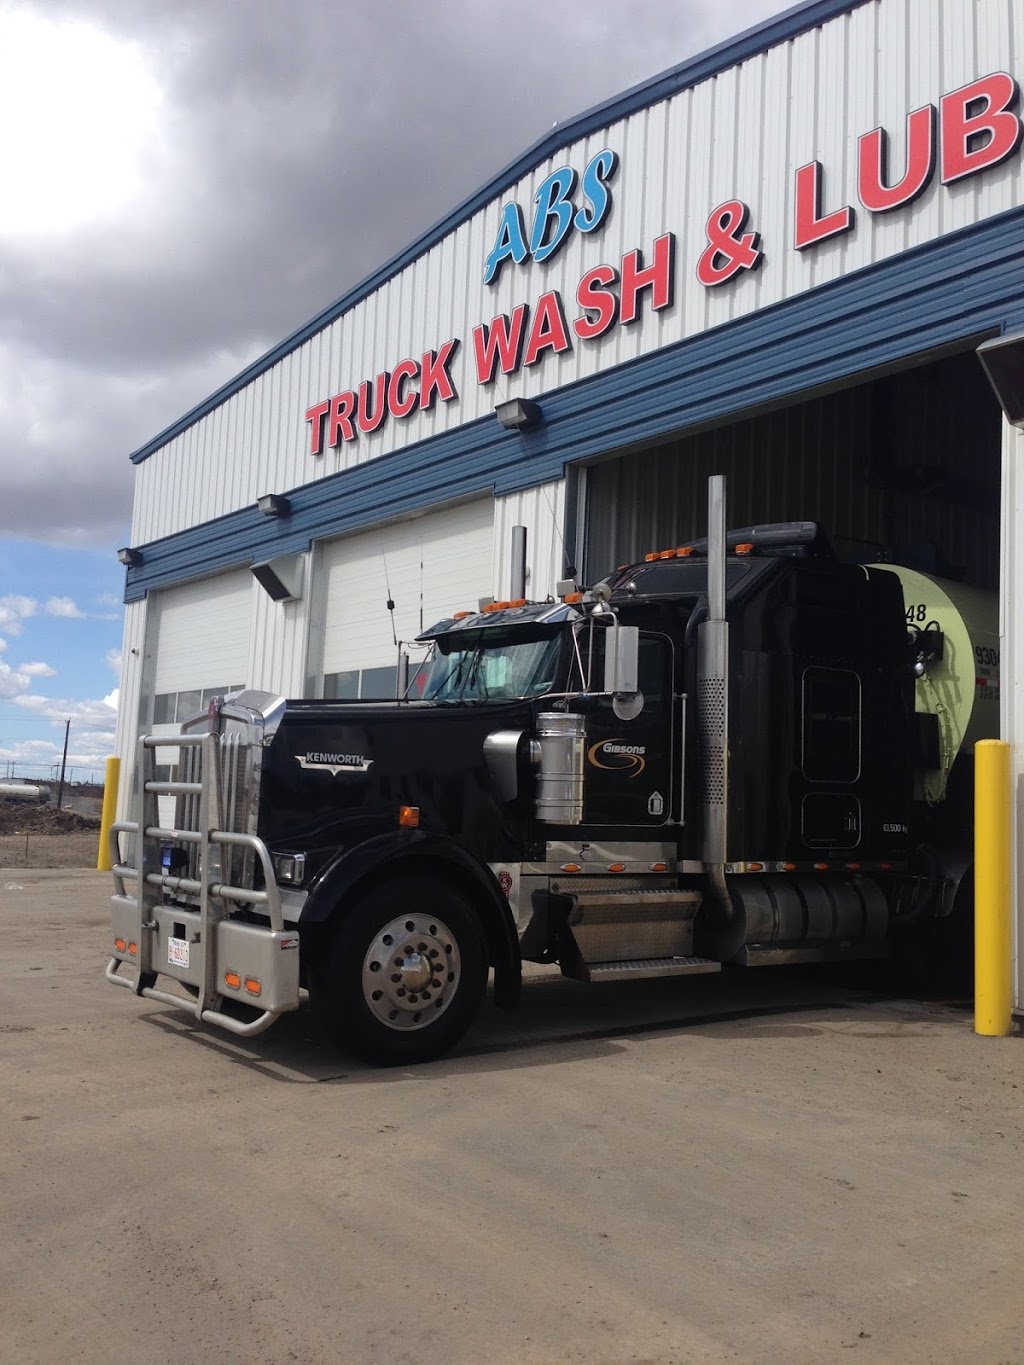 ABS Truck Wash & Lube | 6030 125 Ave NW, Edmonton, AB T5W 5J6, Canada | Phone: (780) 479-6600